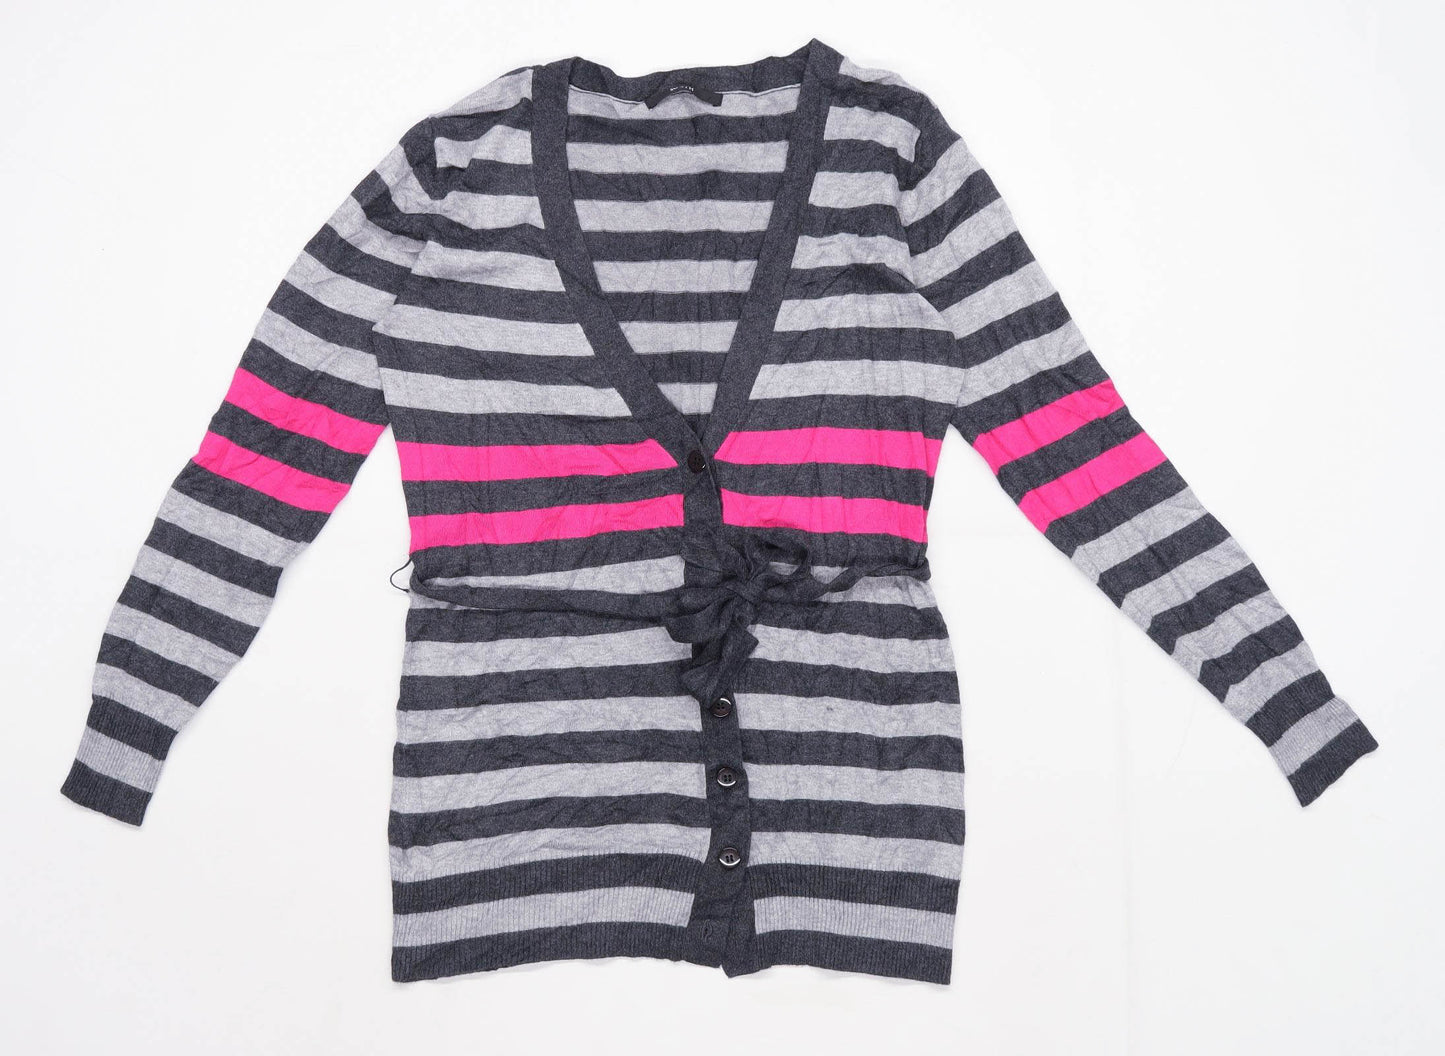 South Womens Size 12 Striped Multi-Coloured Cardigan (Regular)